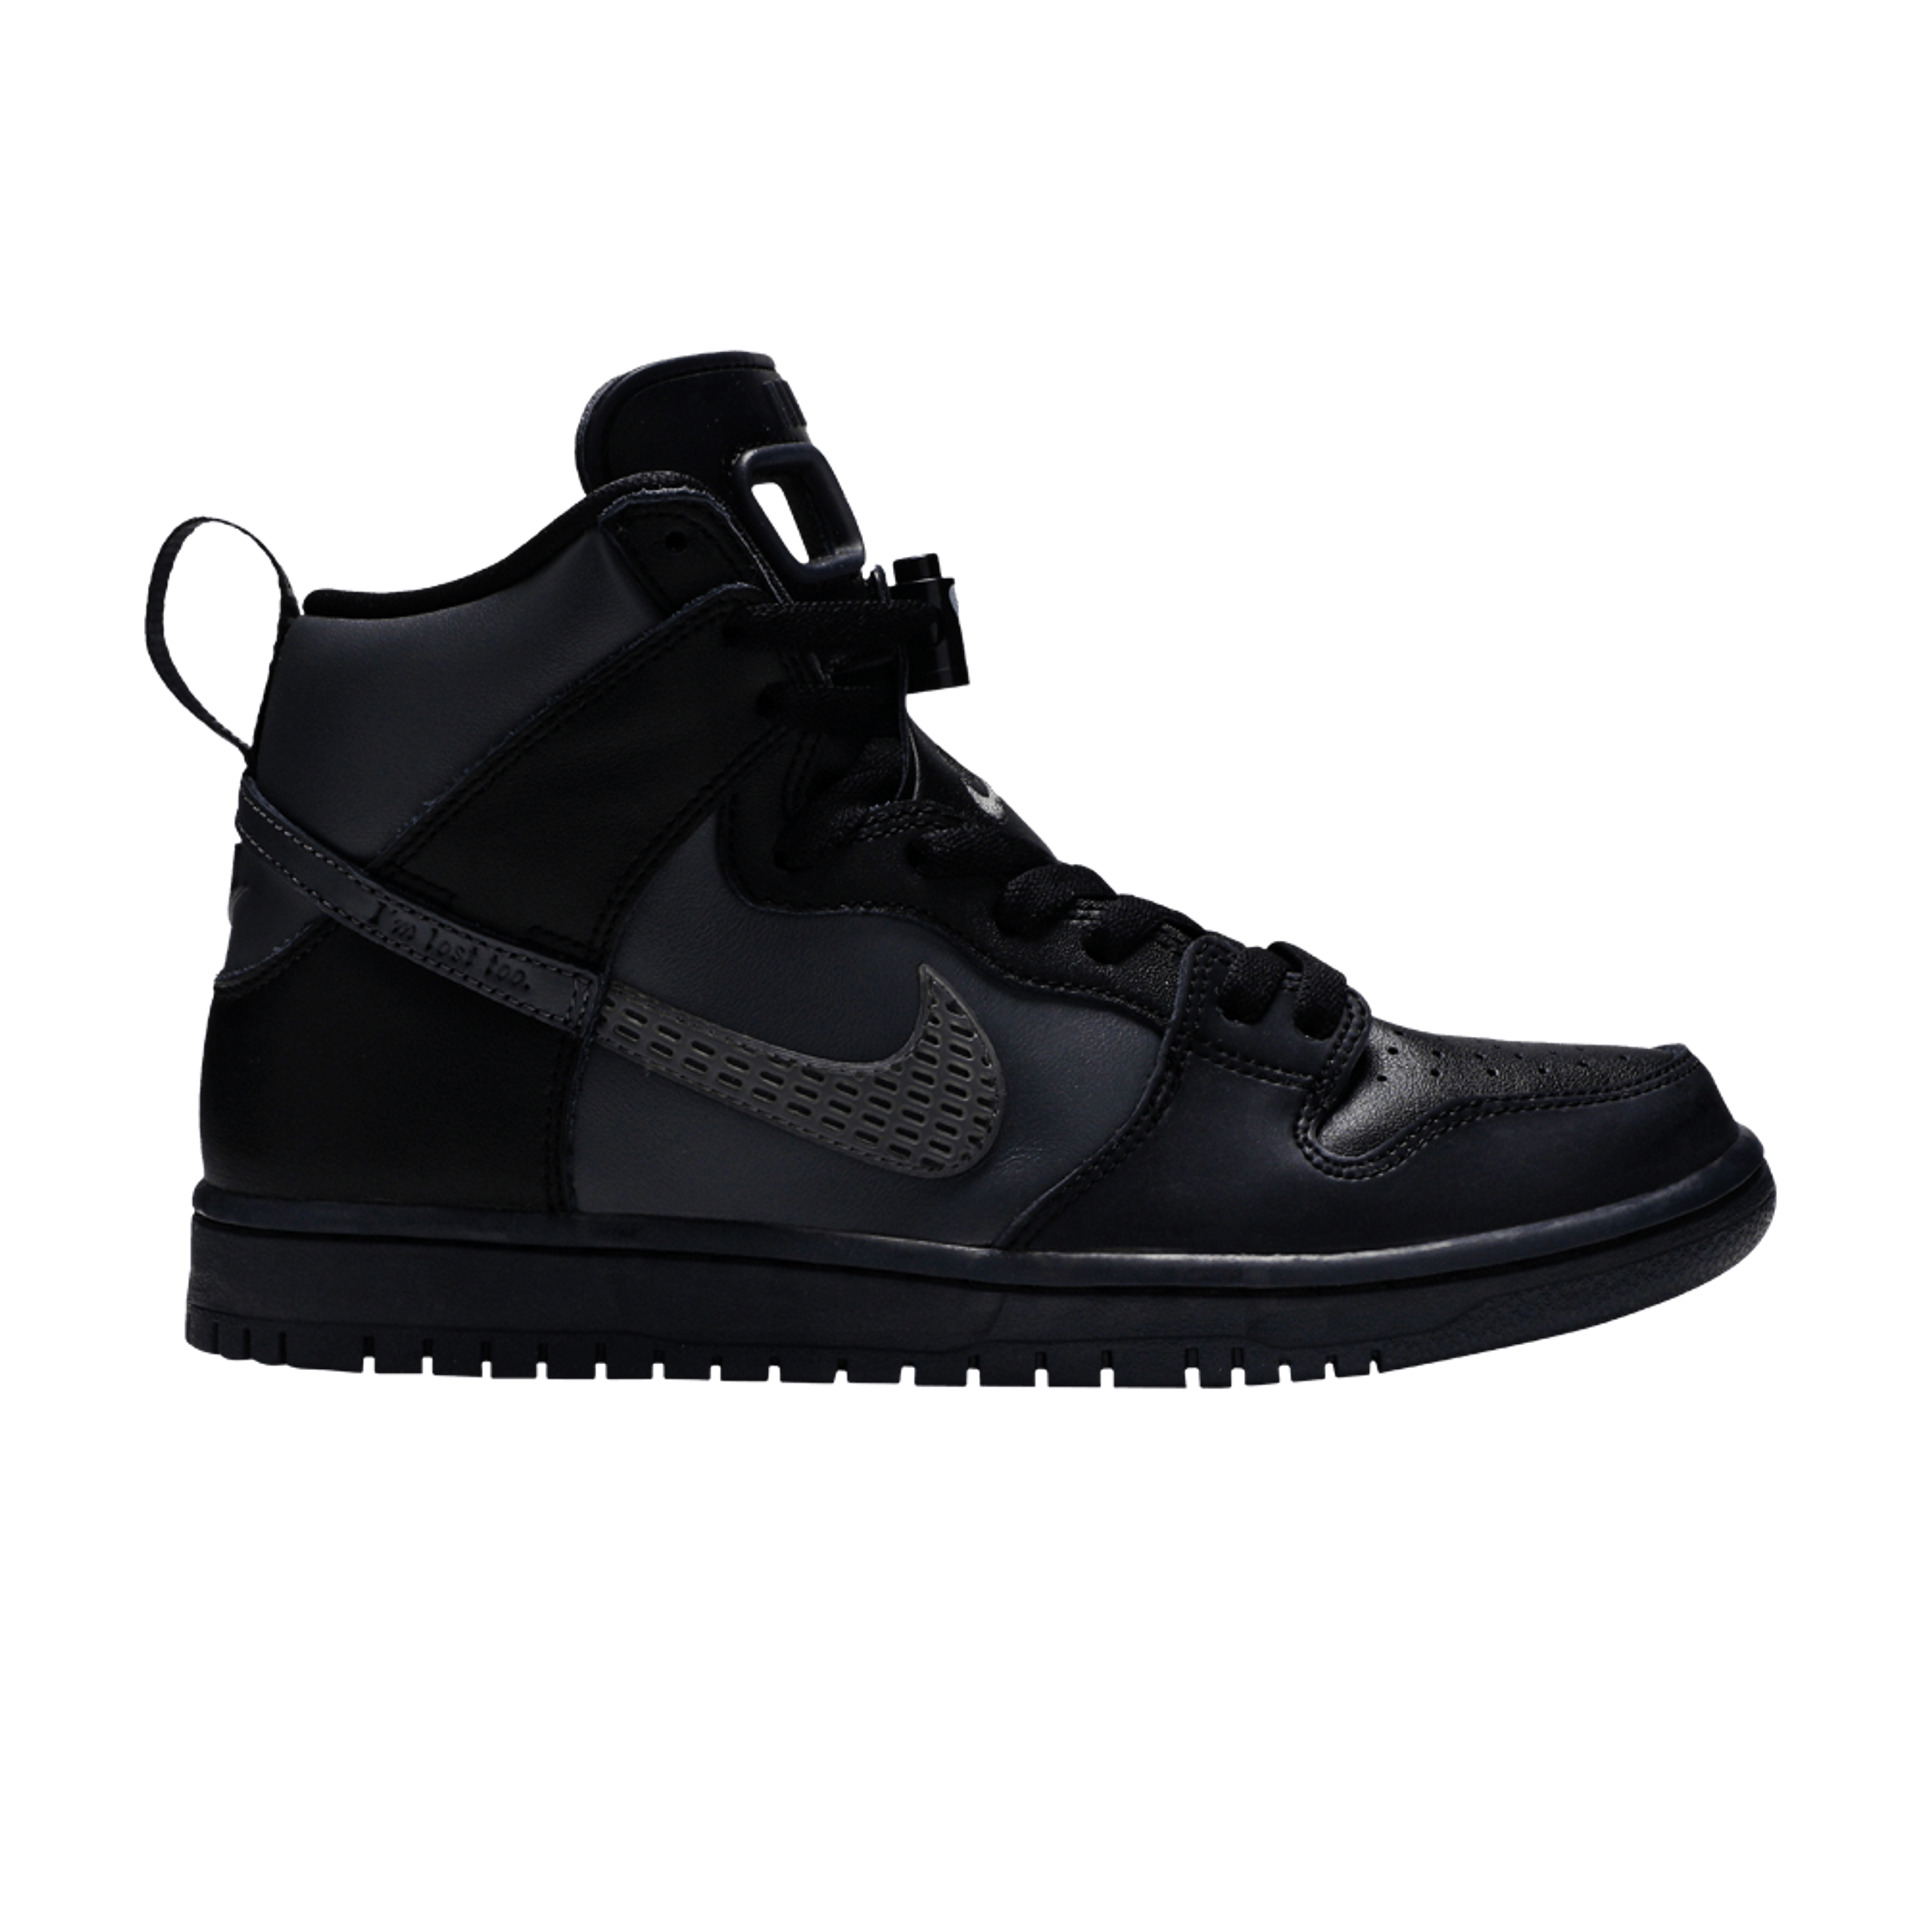 Nike Forty Percent Against Rights x Dunk High SB